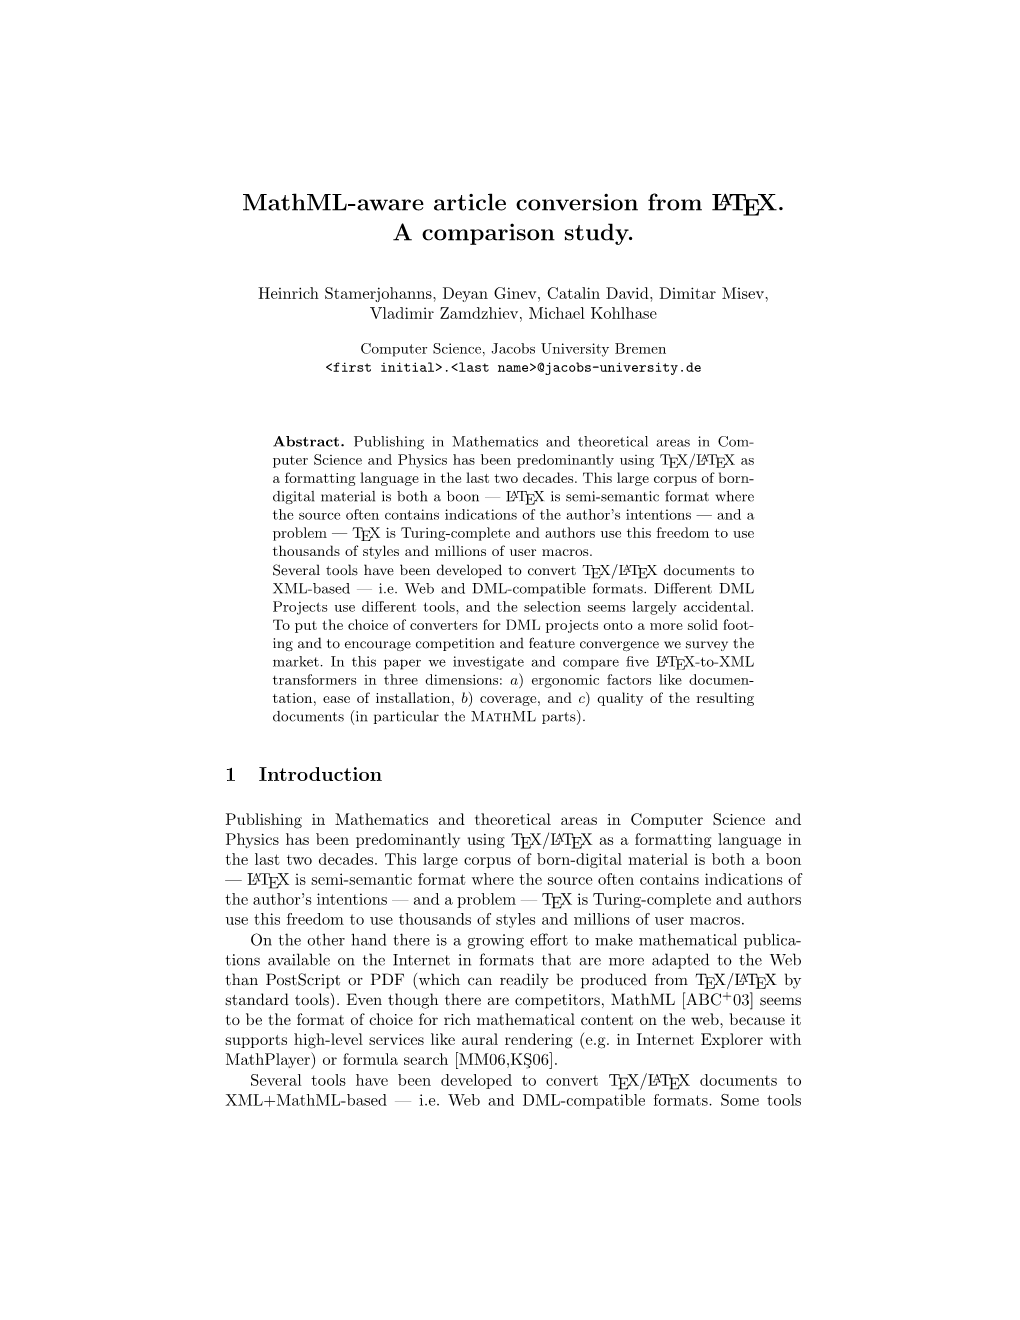 Mathml-Aware Article Conversion from LATEX. a Comparison Study